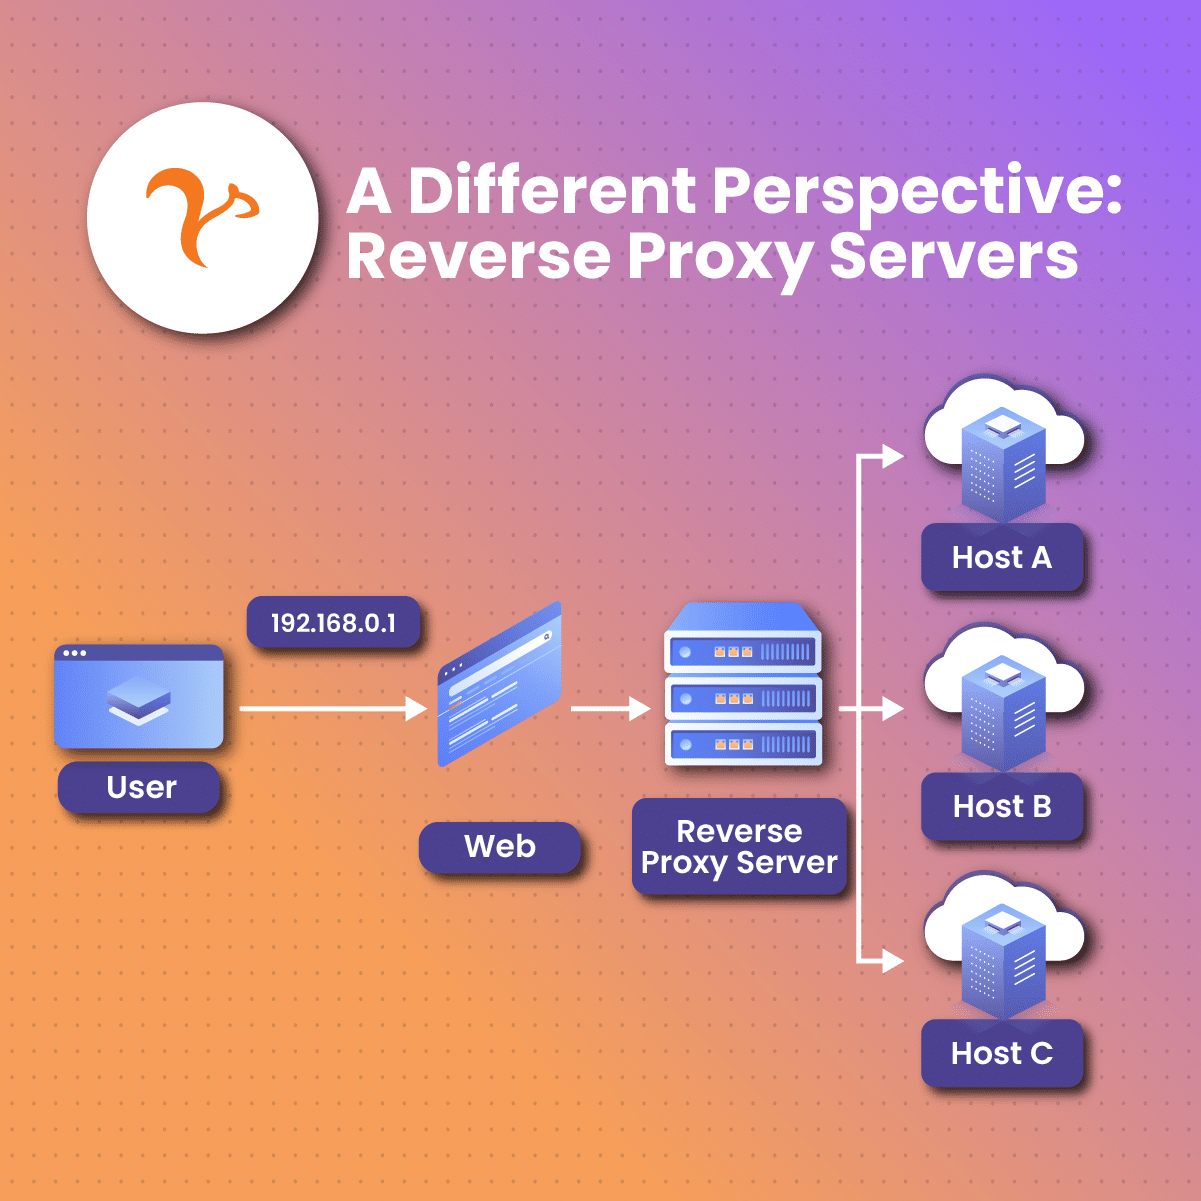 A Different Perspective: Reverse Proxy Servers